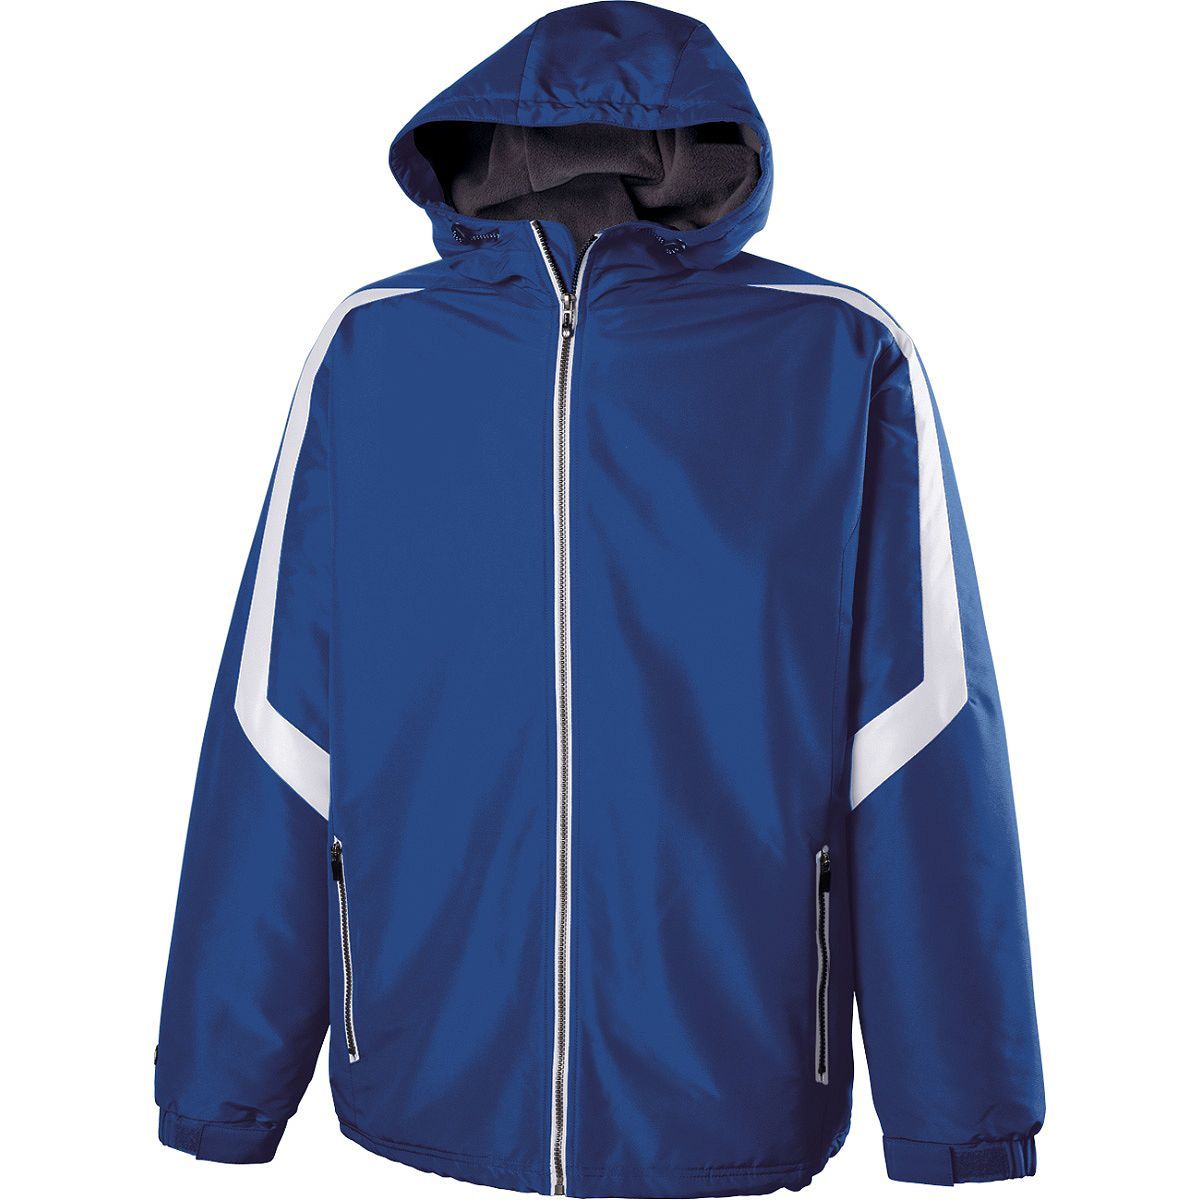 Youth Charger Jacket - 229259